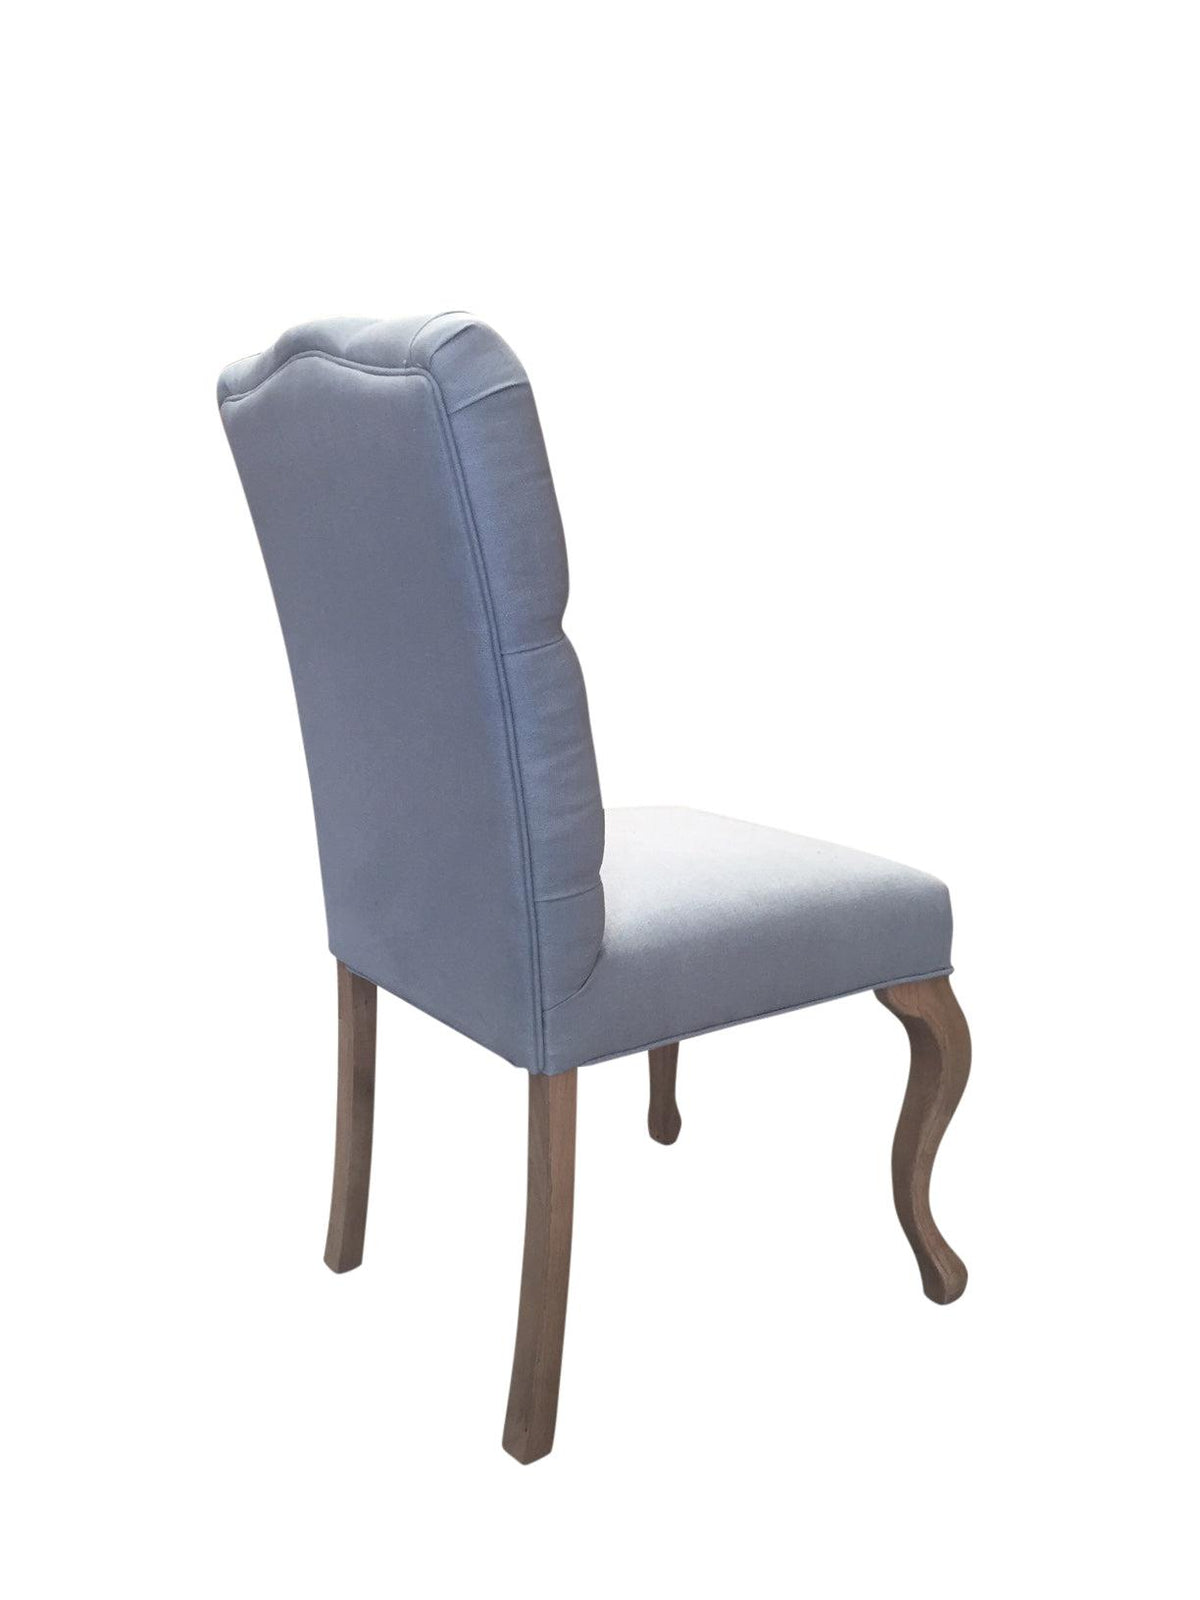 Duck Egg Blue Linen French Style Buttoned Dining Chair